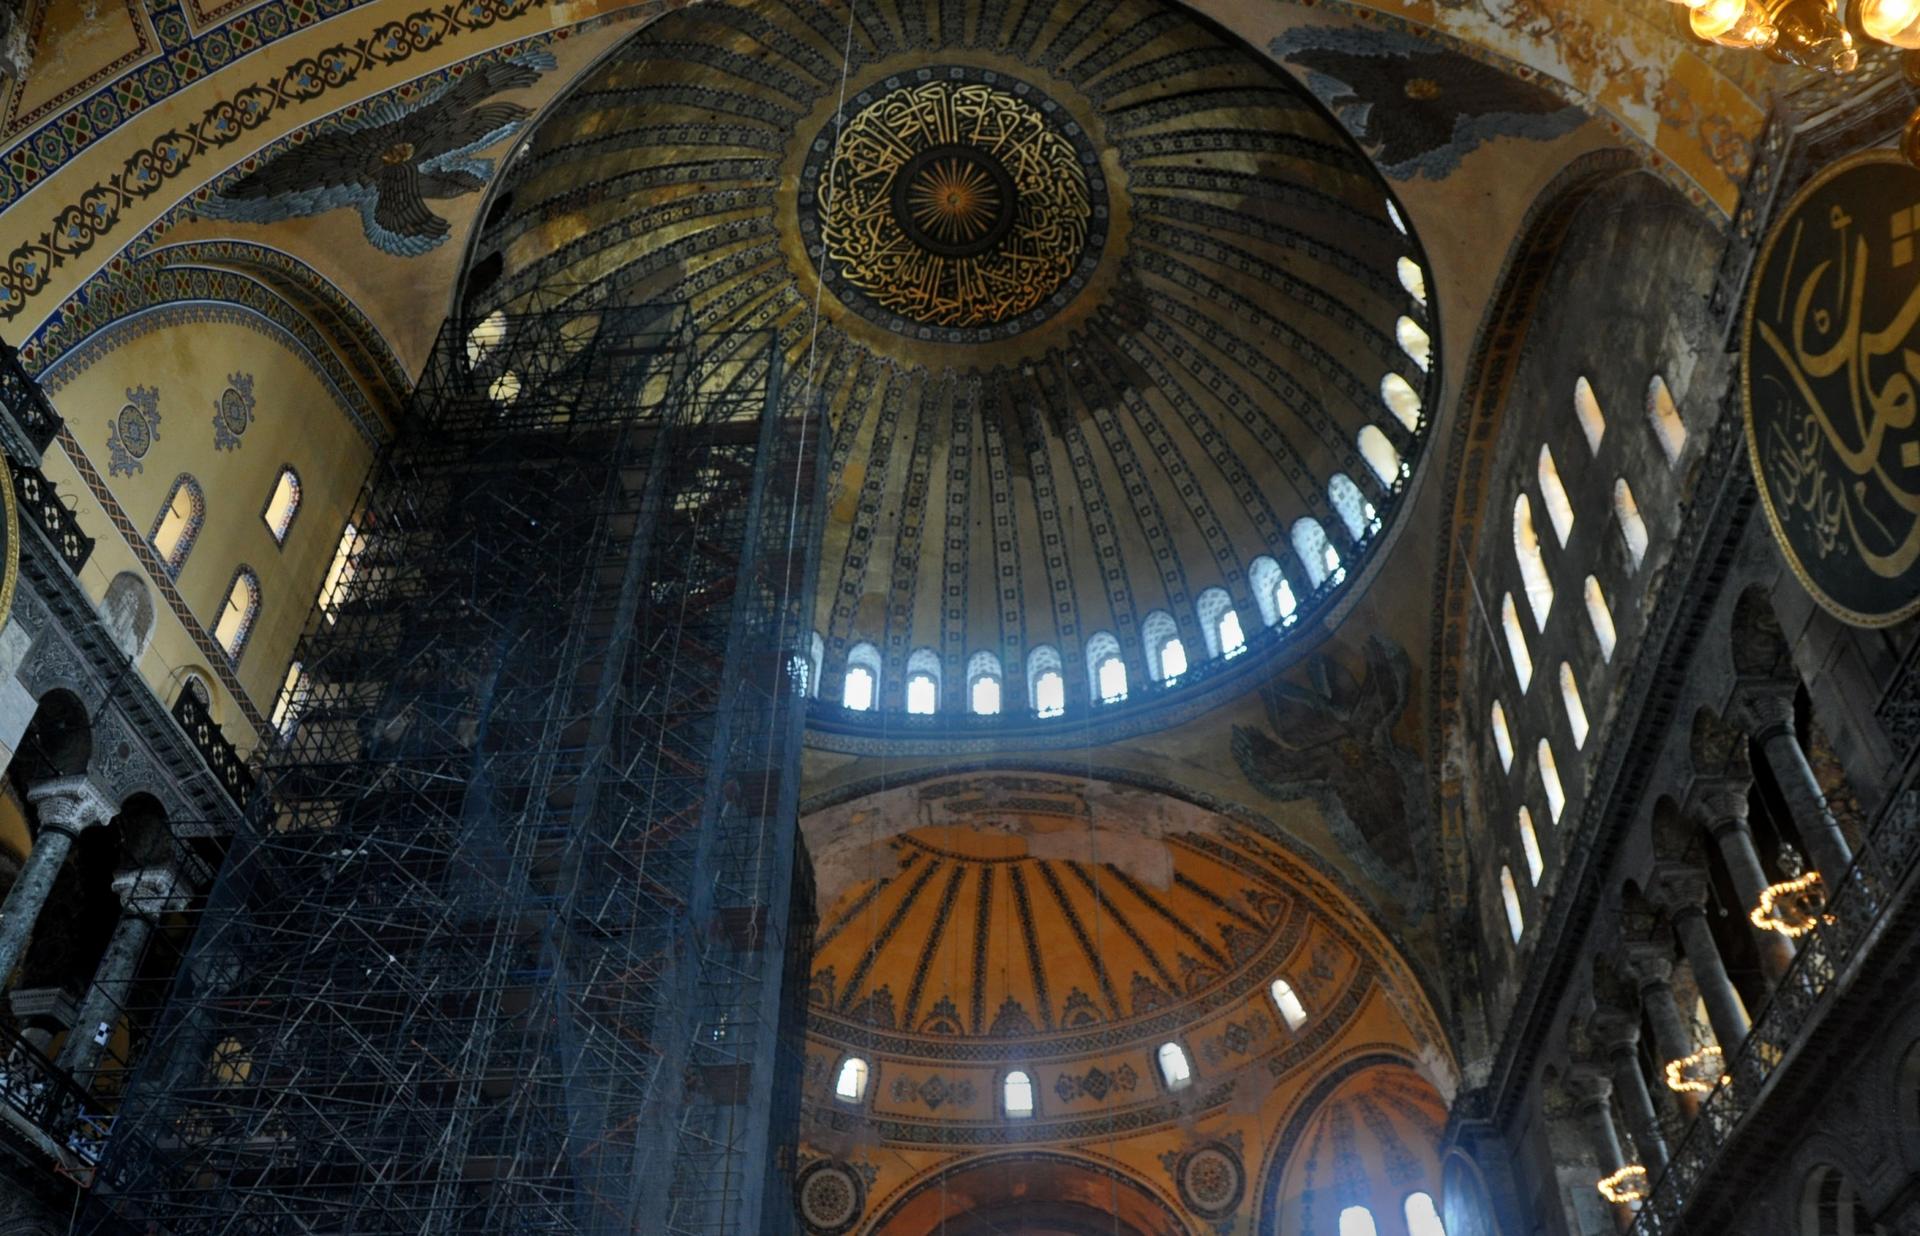 The majestic dome of the Haghia Sophia with scaffolding for repairs